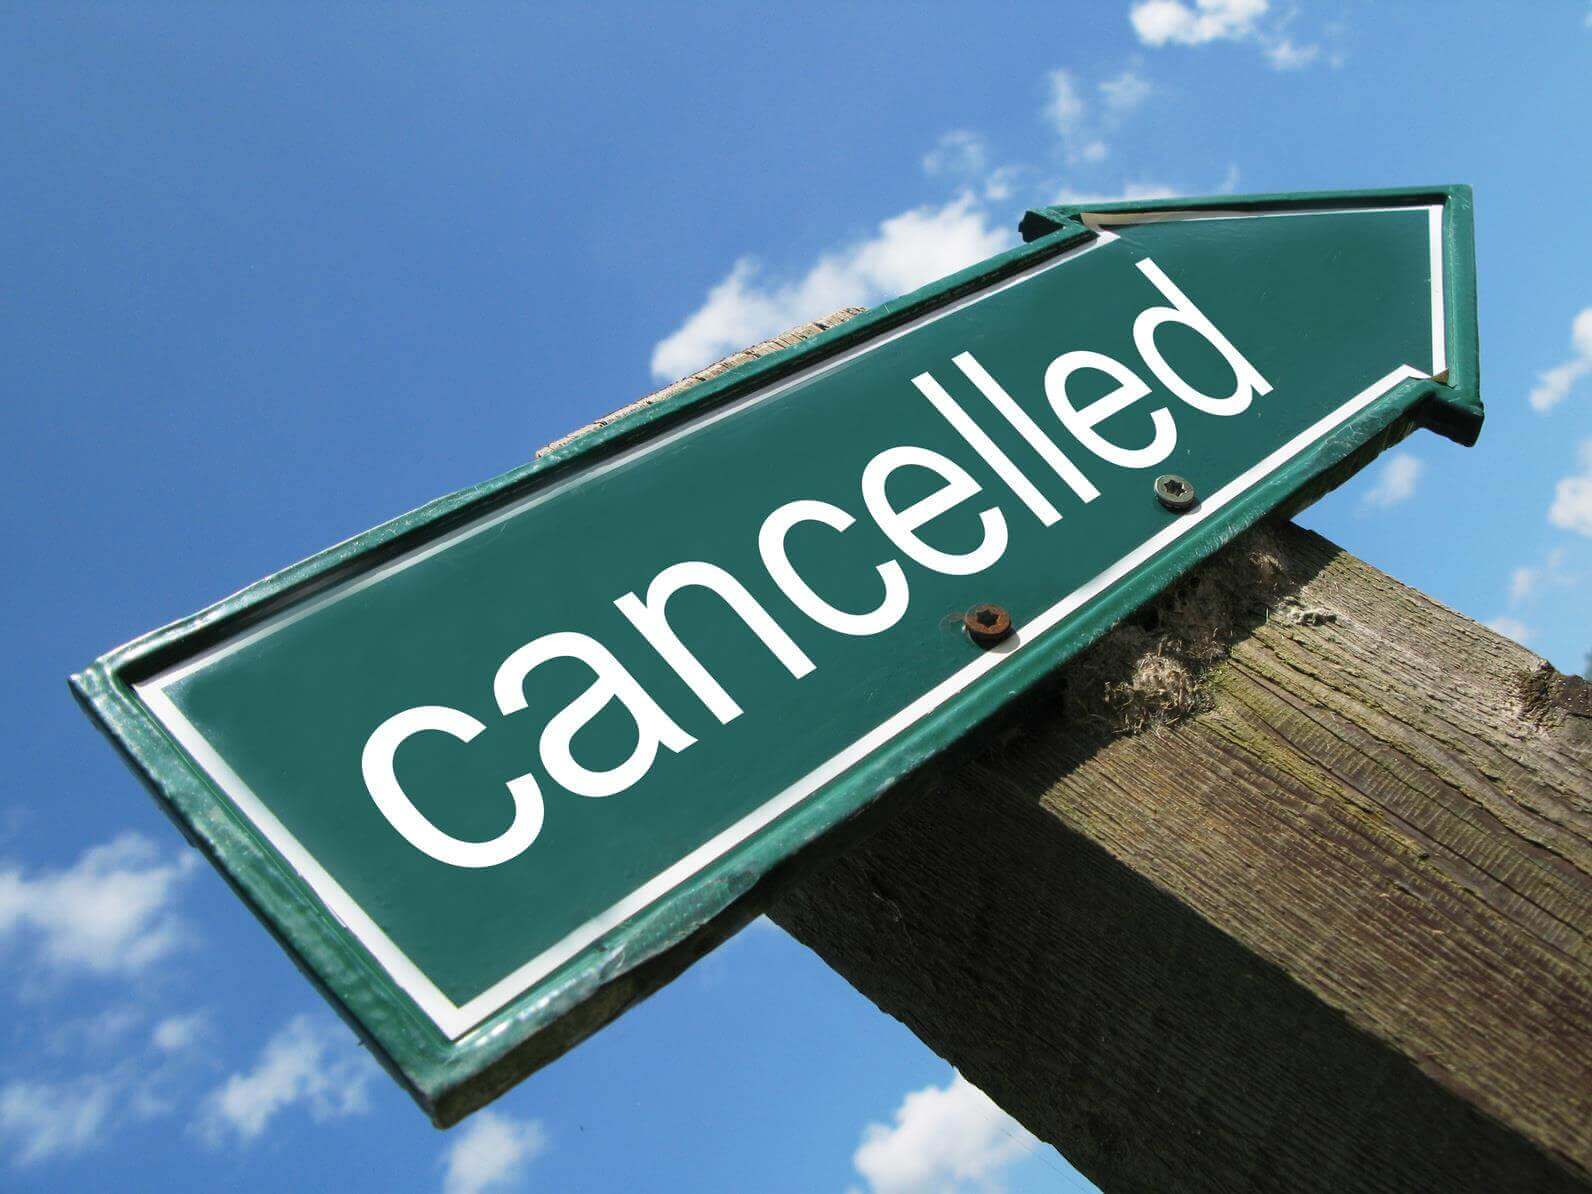 sign saying cancelled reflecting increase in hotel cancelation policies